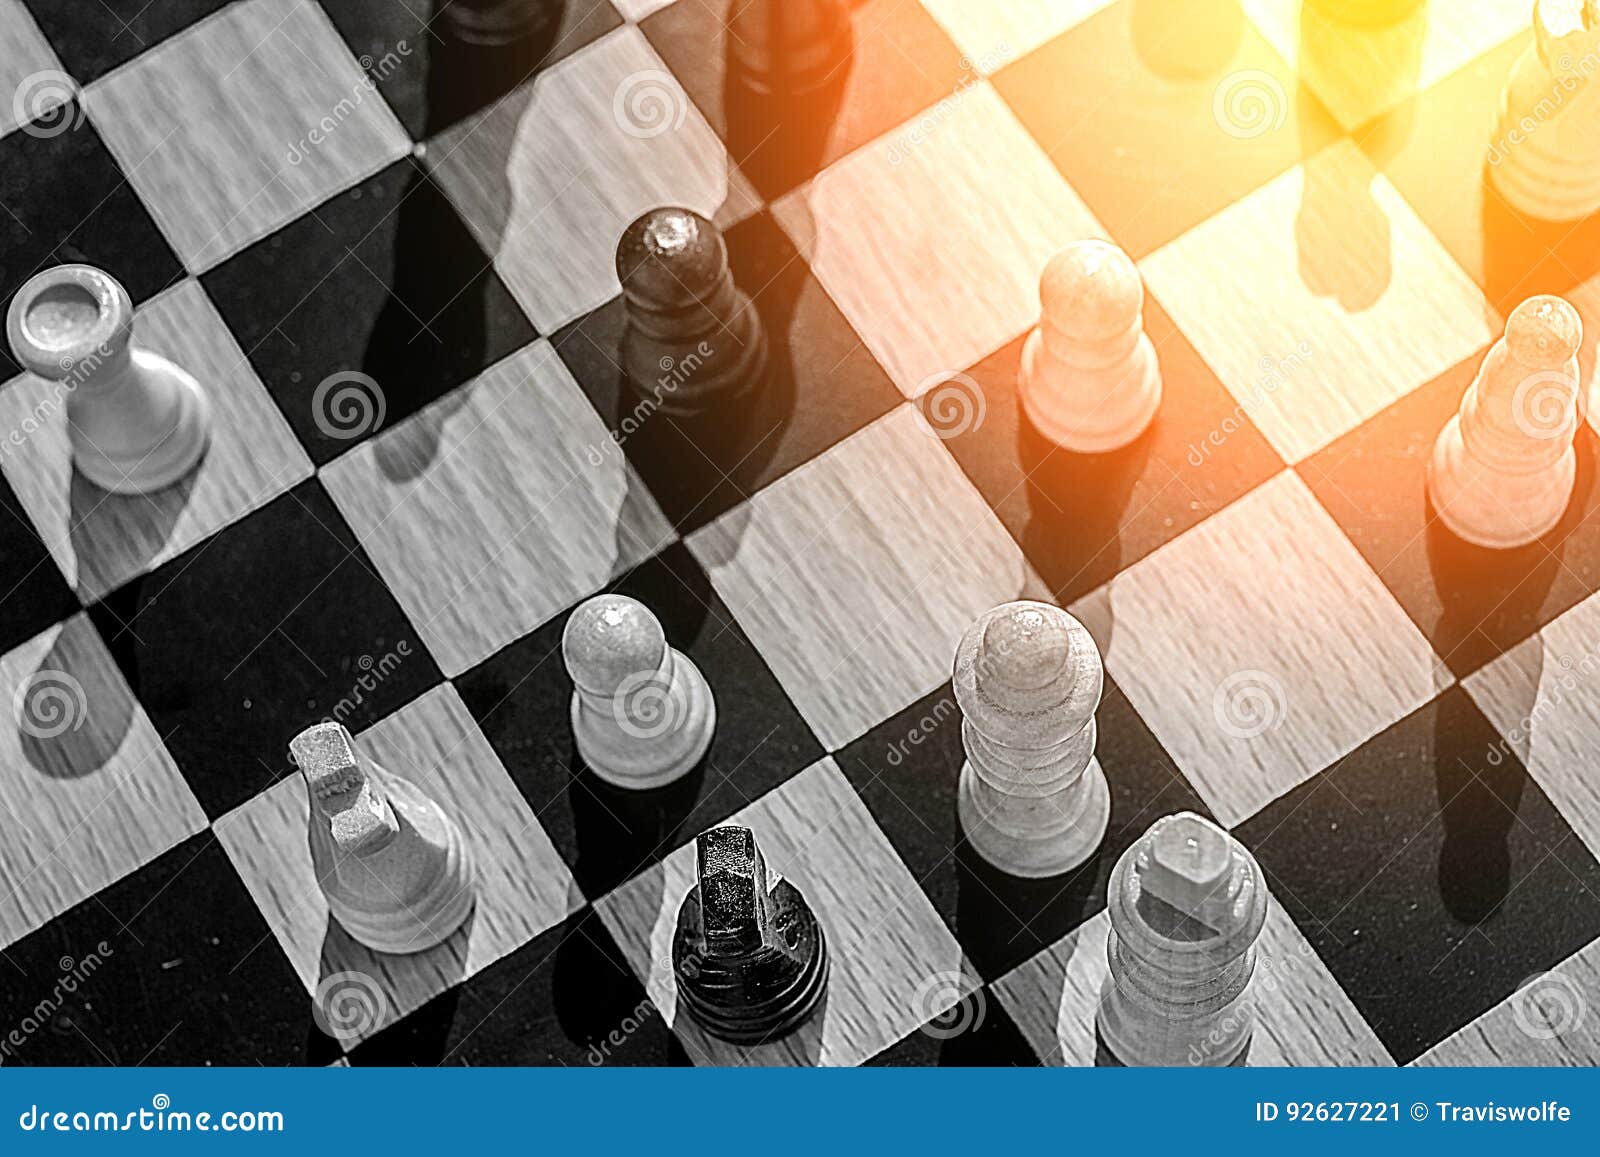 Sicilian Defense in Chess Game Stock Photo - Image of pawn, board: 58943894